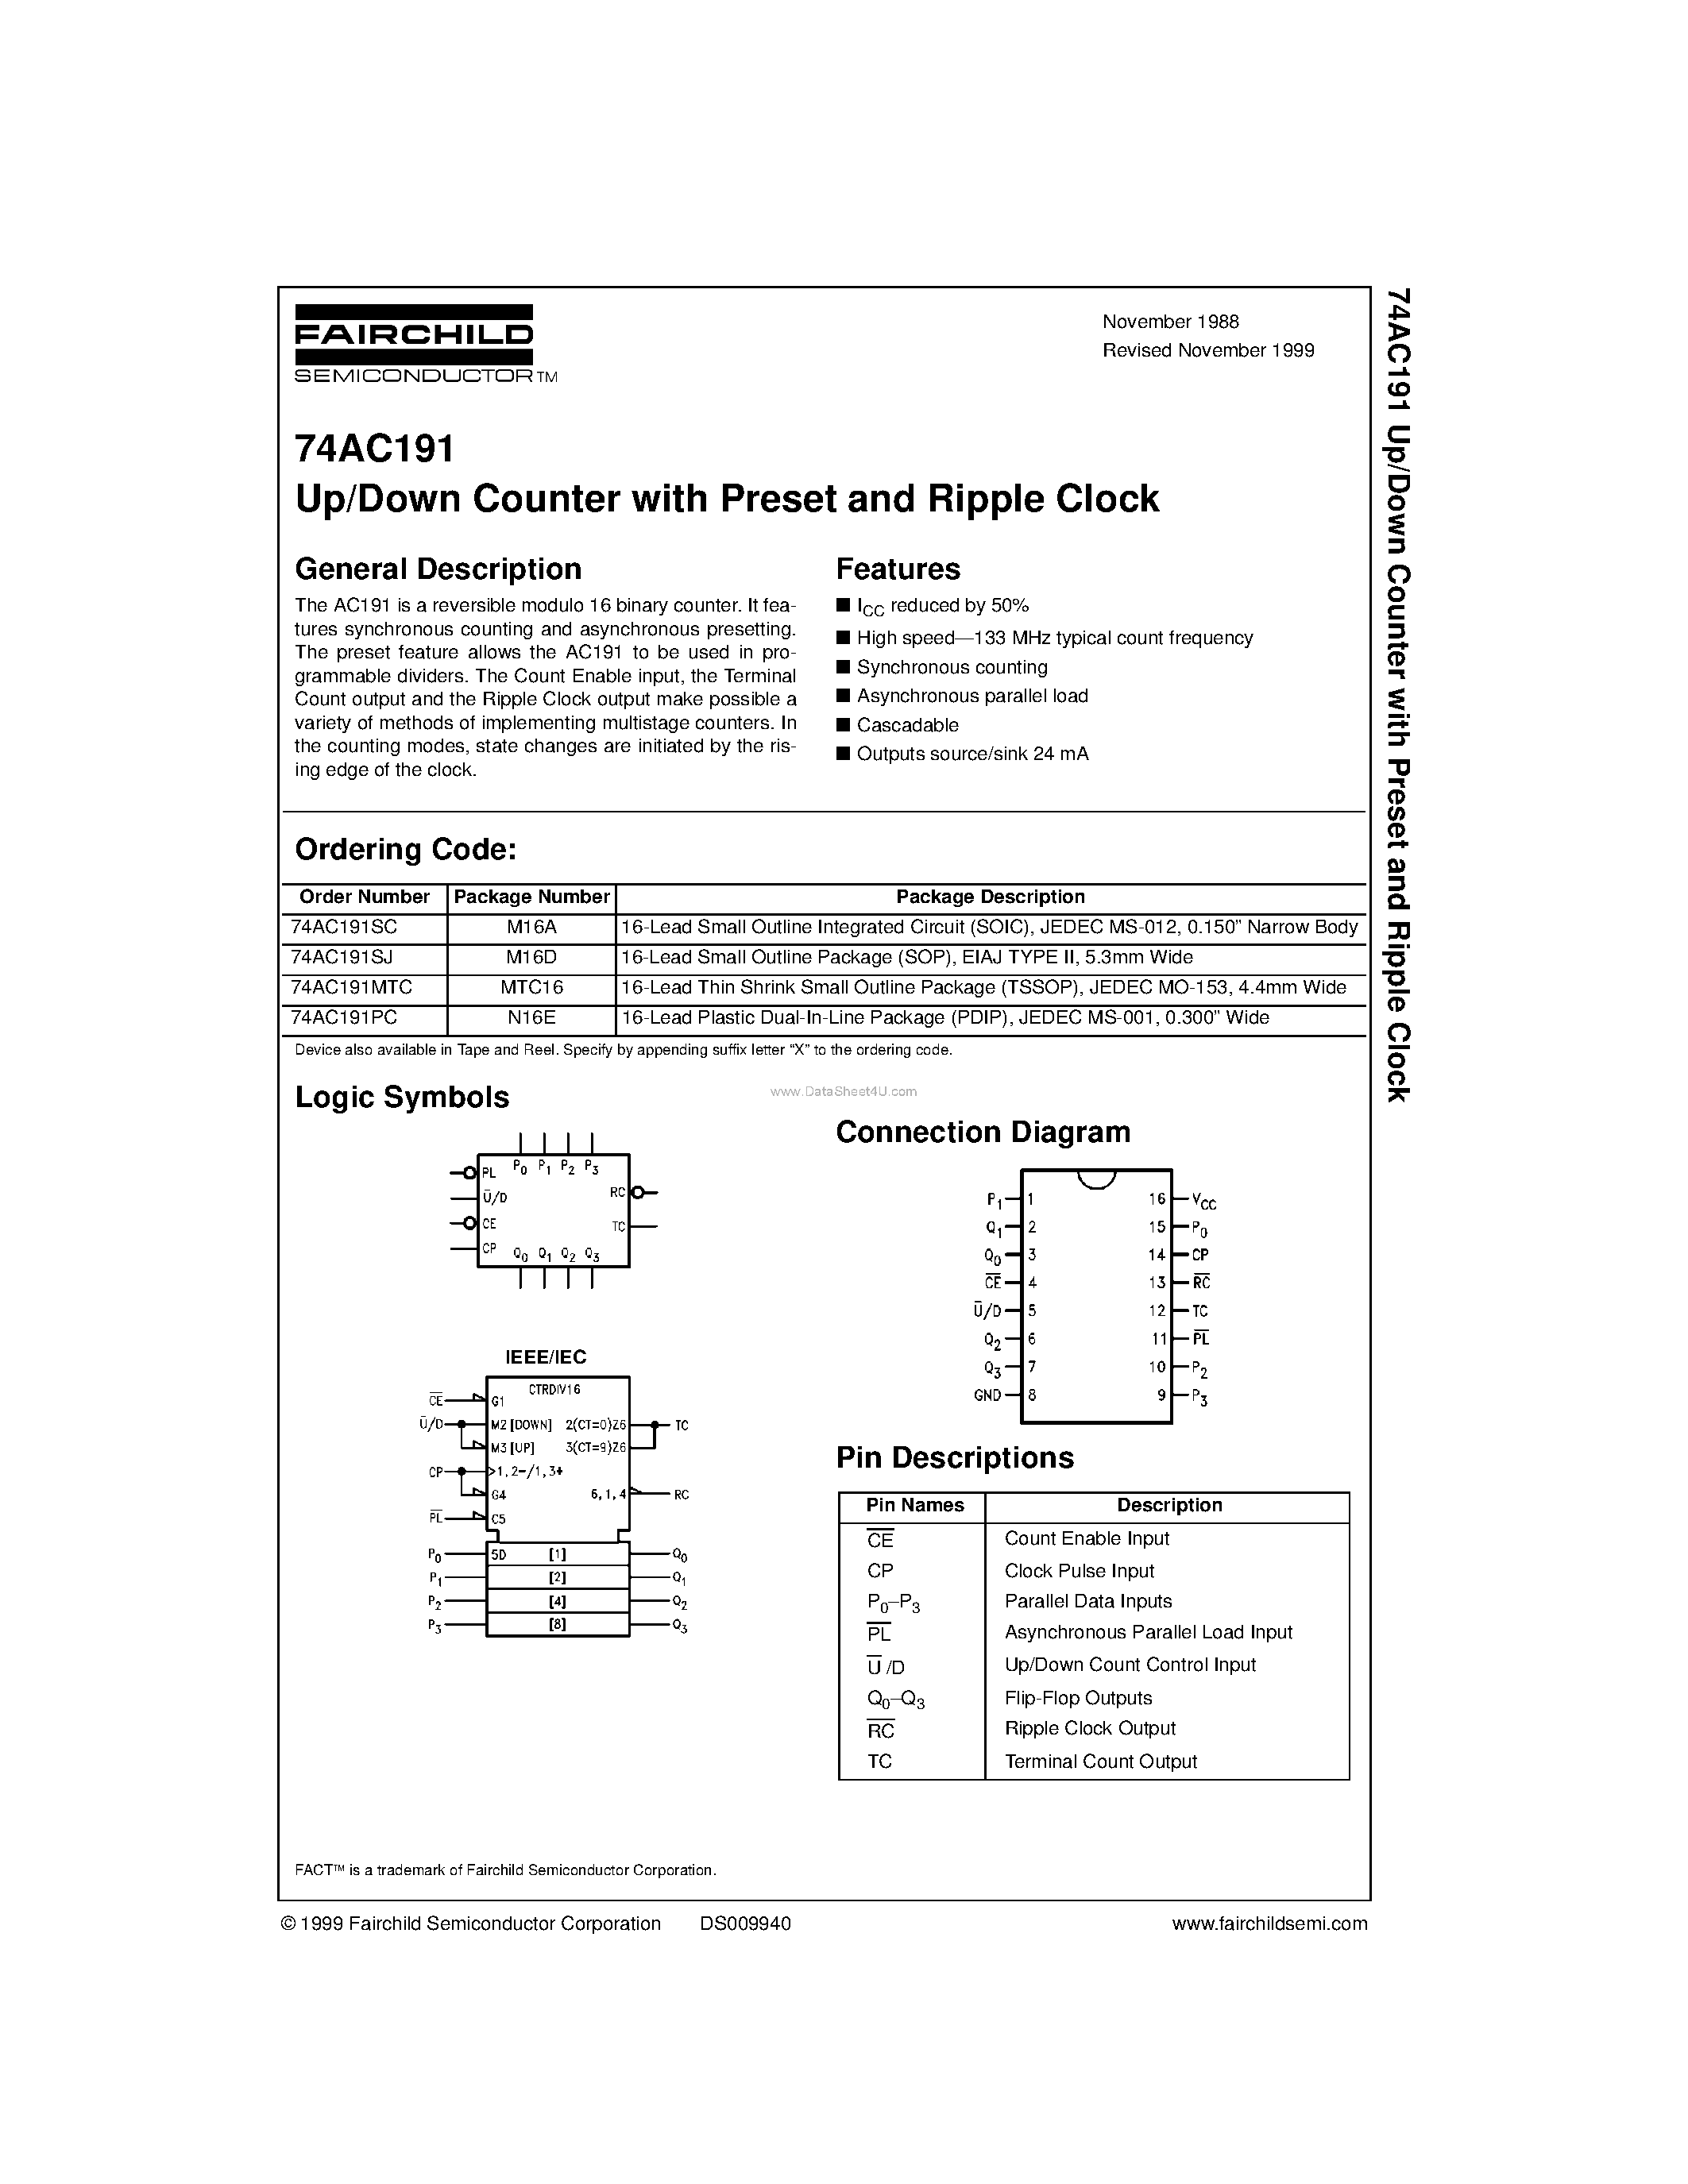 Datasheet 74AC191PC - Up/Down Counter with Preset and Ripple Clock page 1